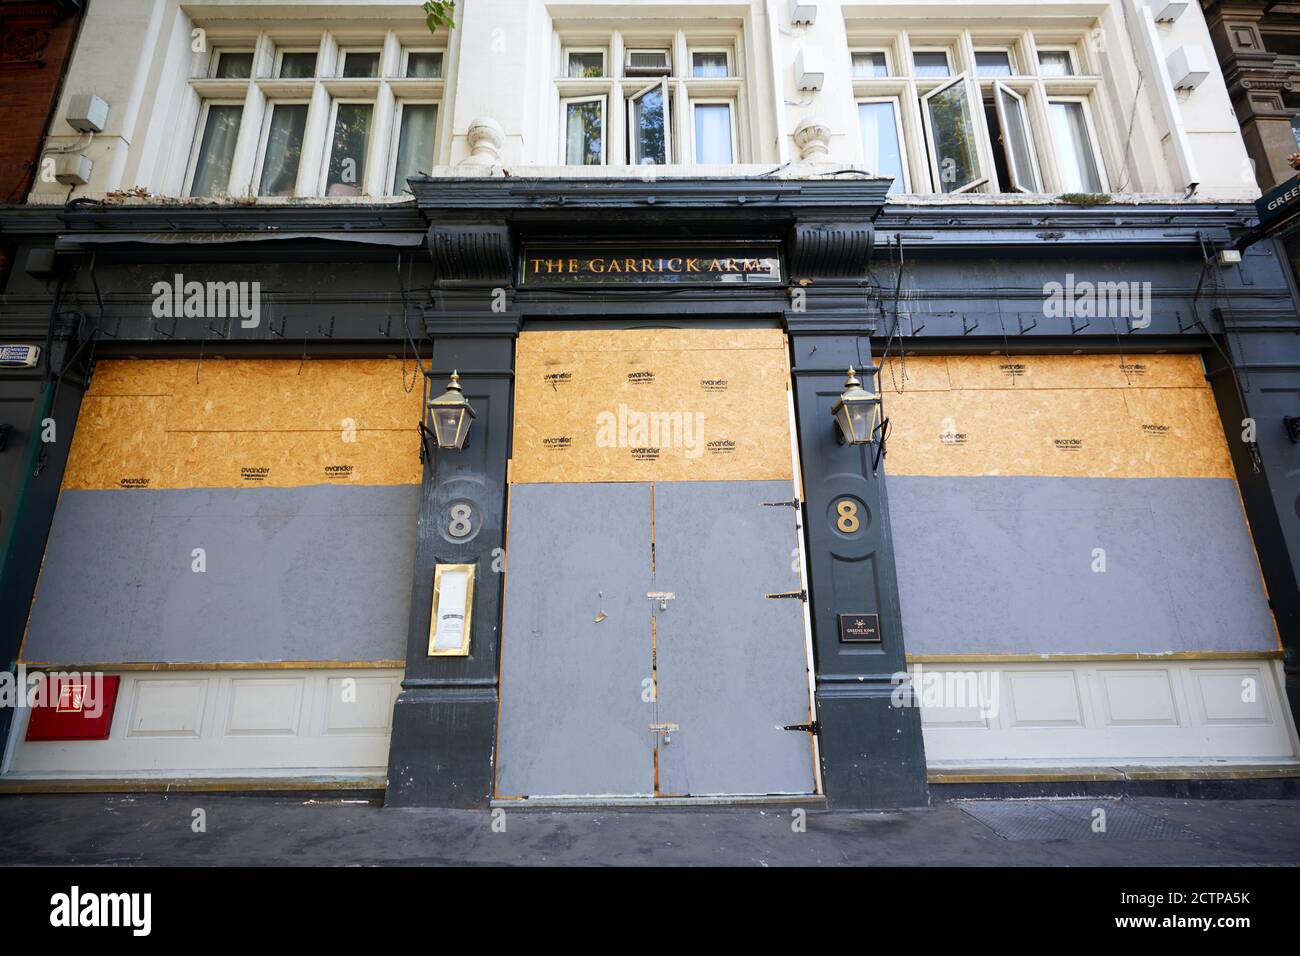 London, UK. - 20 Sept 2020: The boarded-up front of the Garick Arms pub on Charing Cross Road in central London. The Greene King pub has been shut since the start of the coronavirus pandemic. Stock Photo